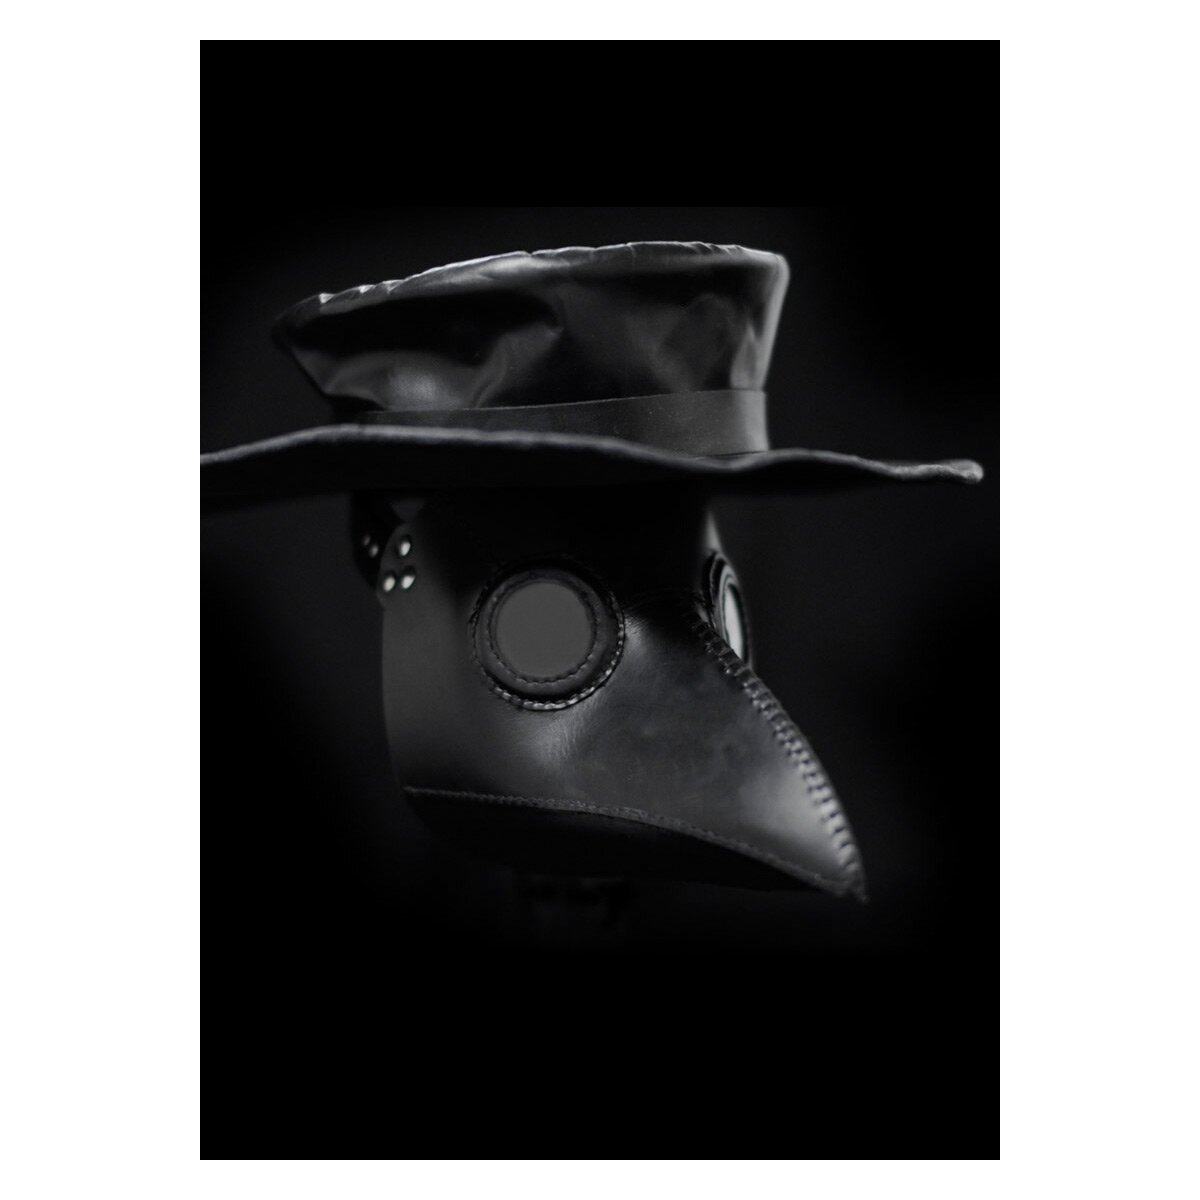 Plague doctor set - mask and hat made of leather